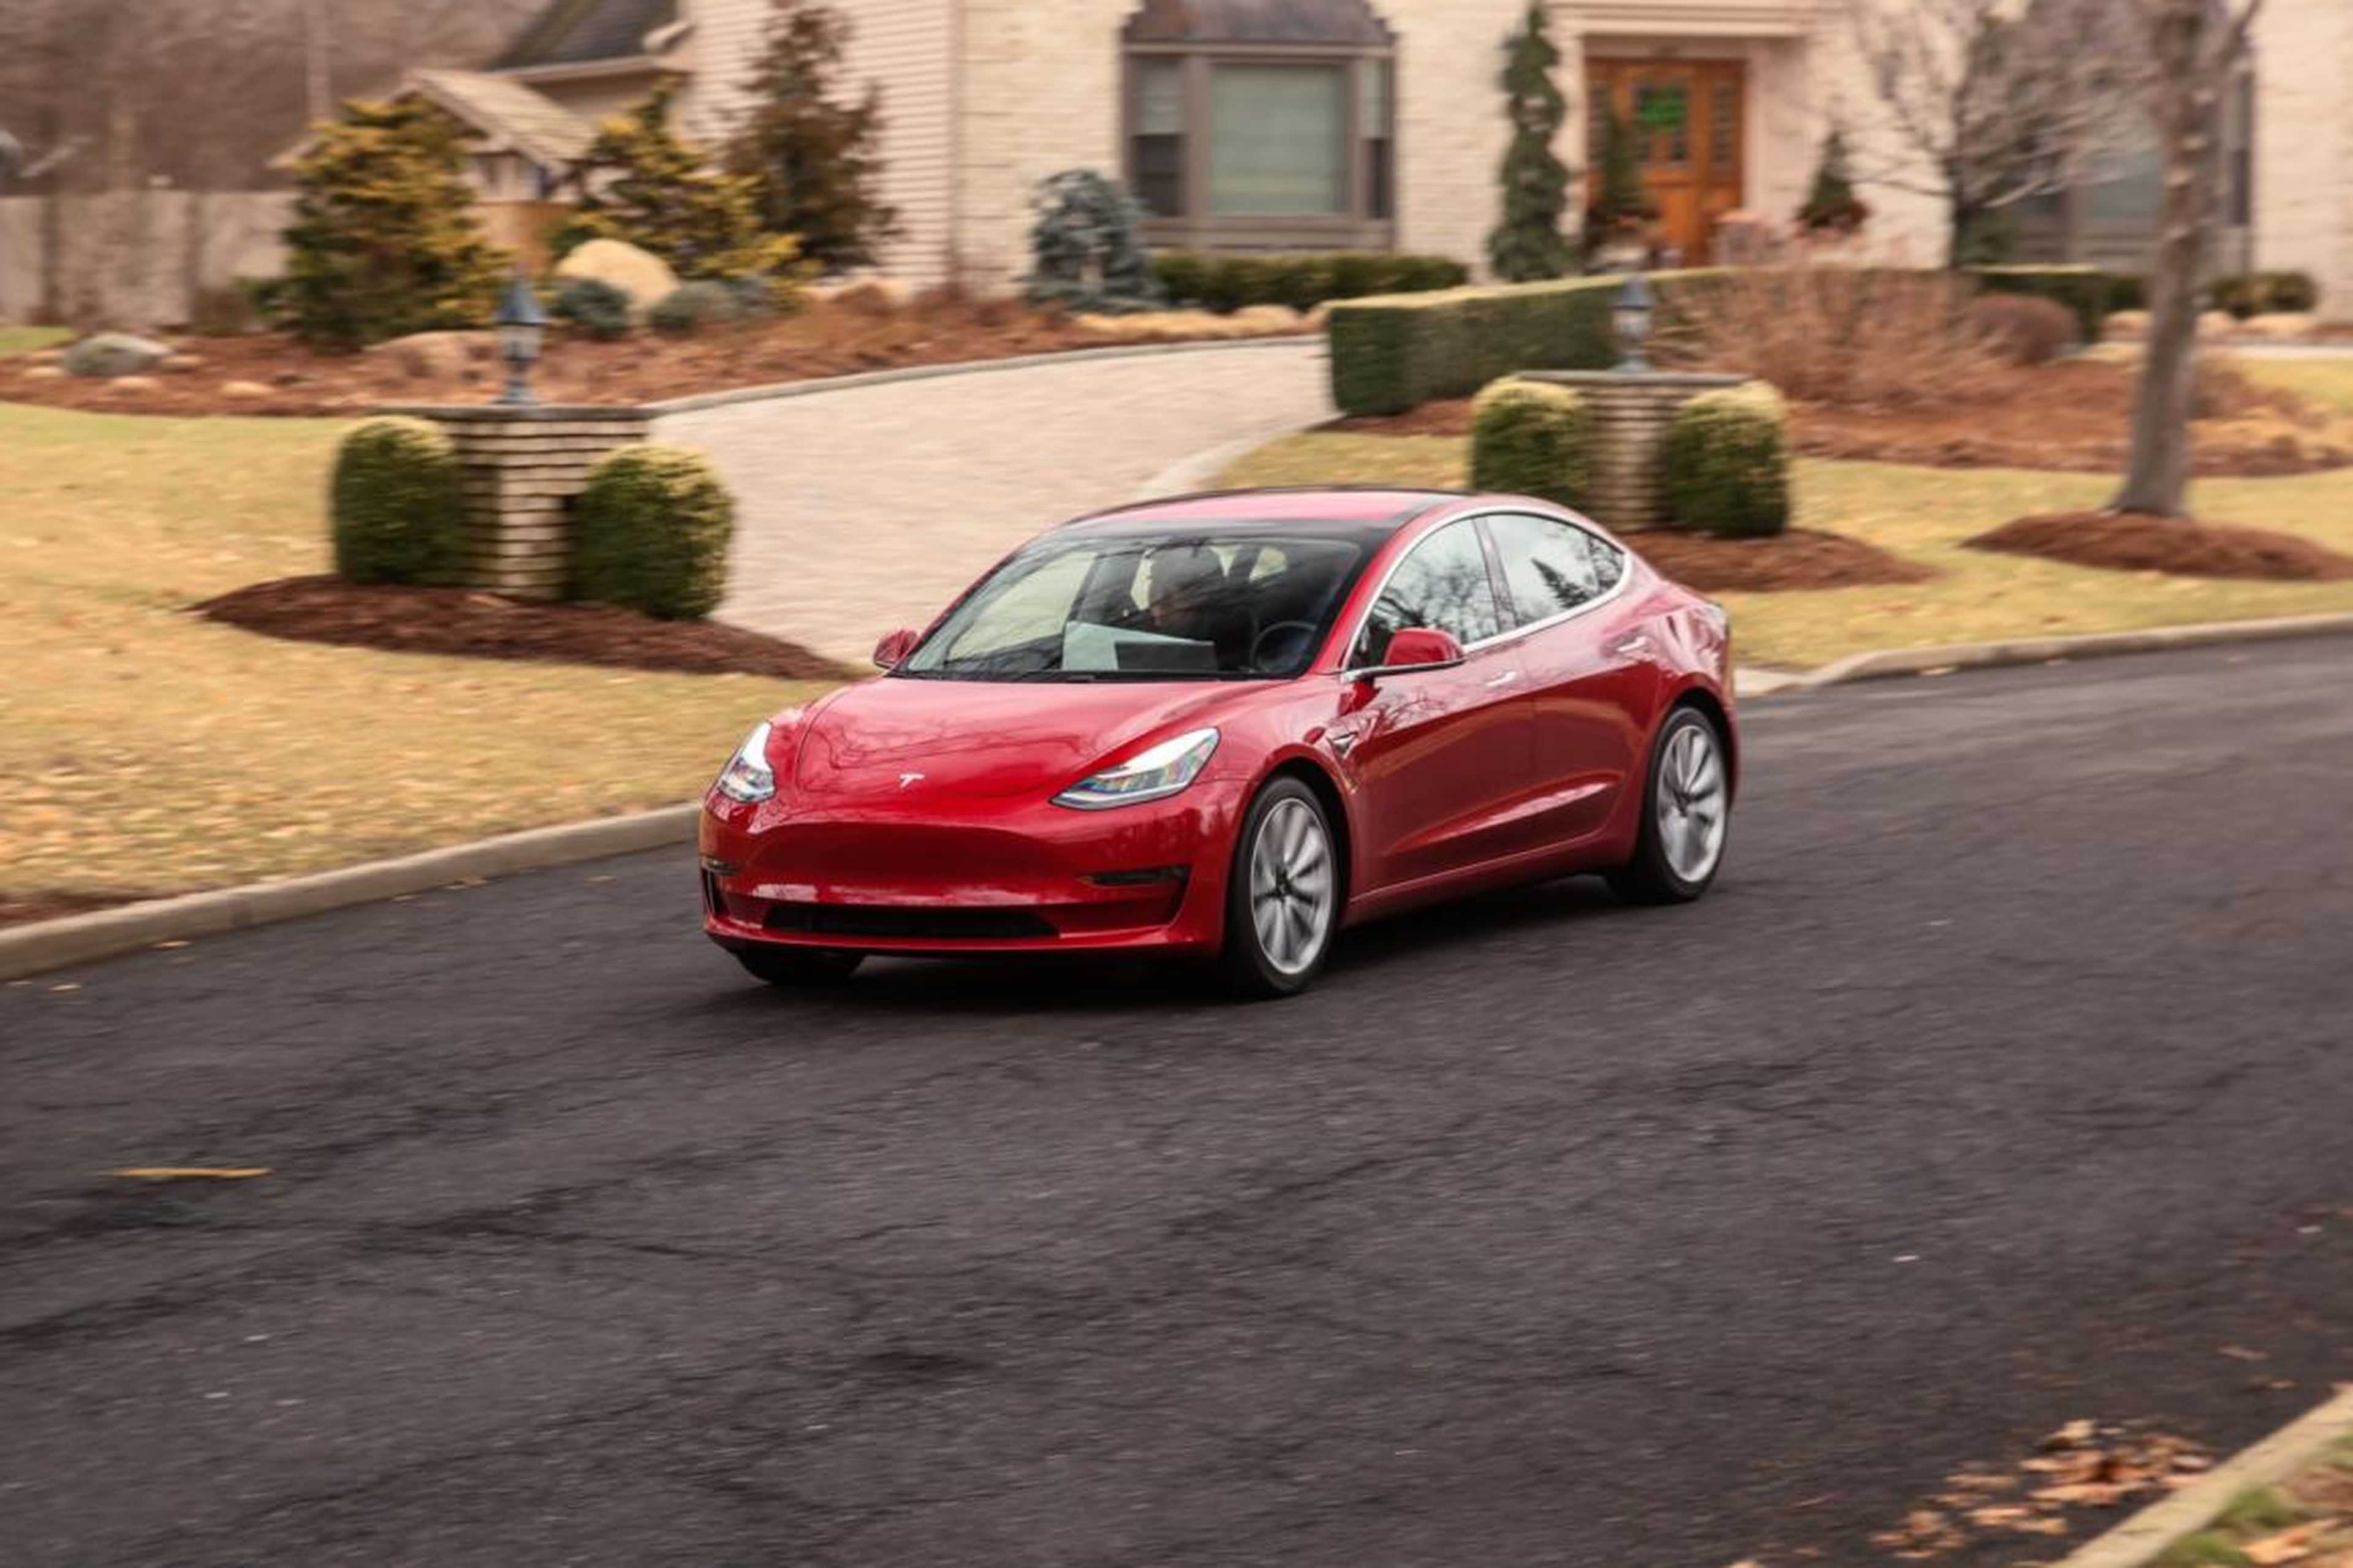 2. The range on the standard Model 3 is around 215 to 220 miles. The Model 3 Performance, like the long-range Model 3, can get up to 310 miles on a single charge.